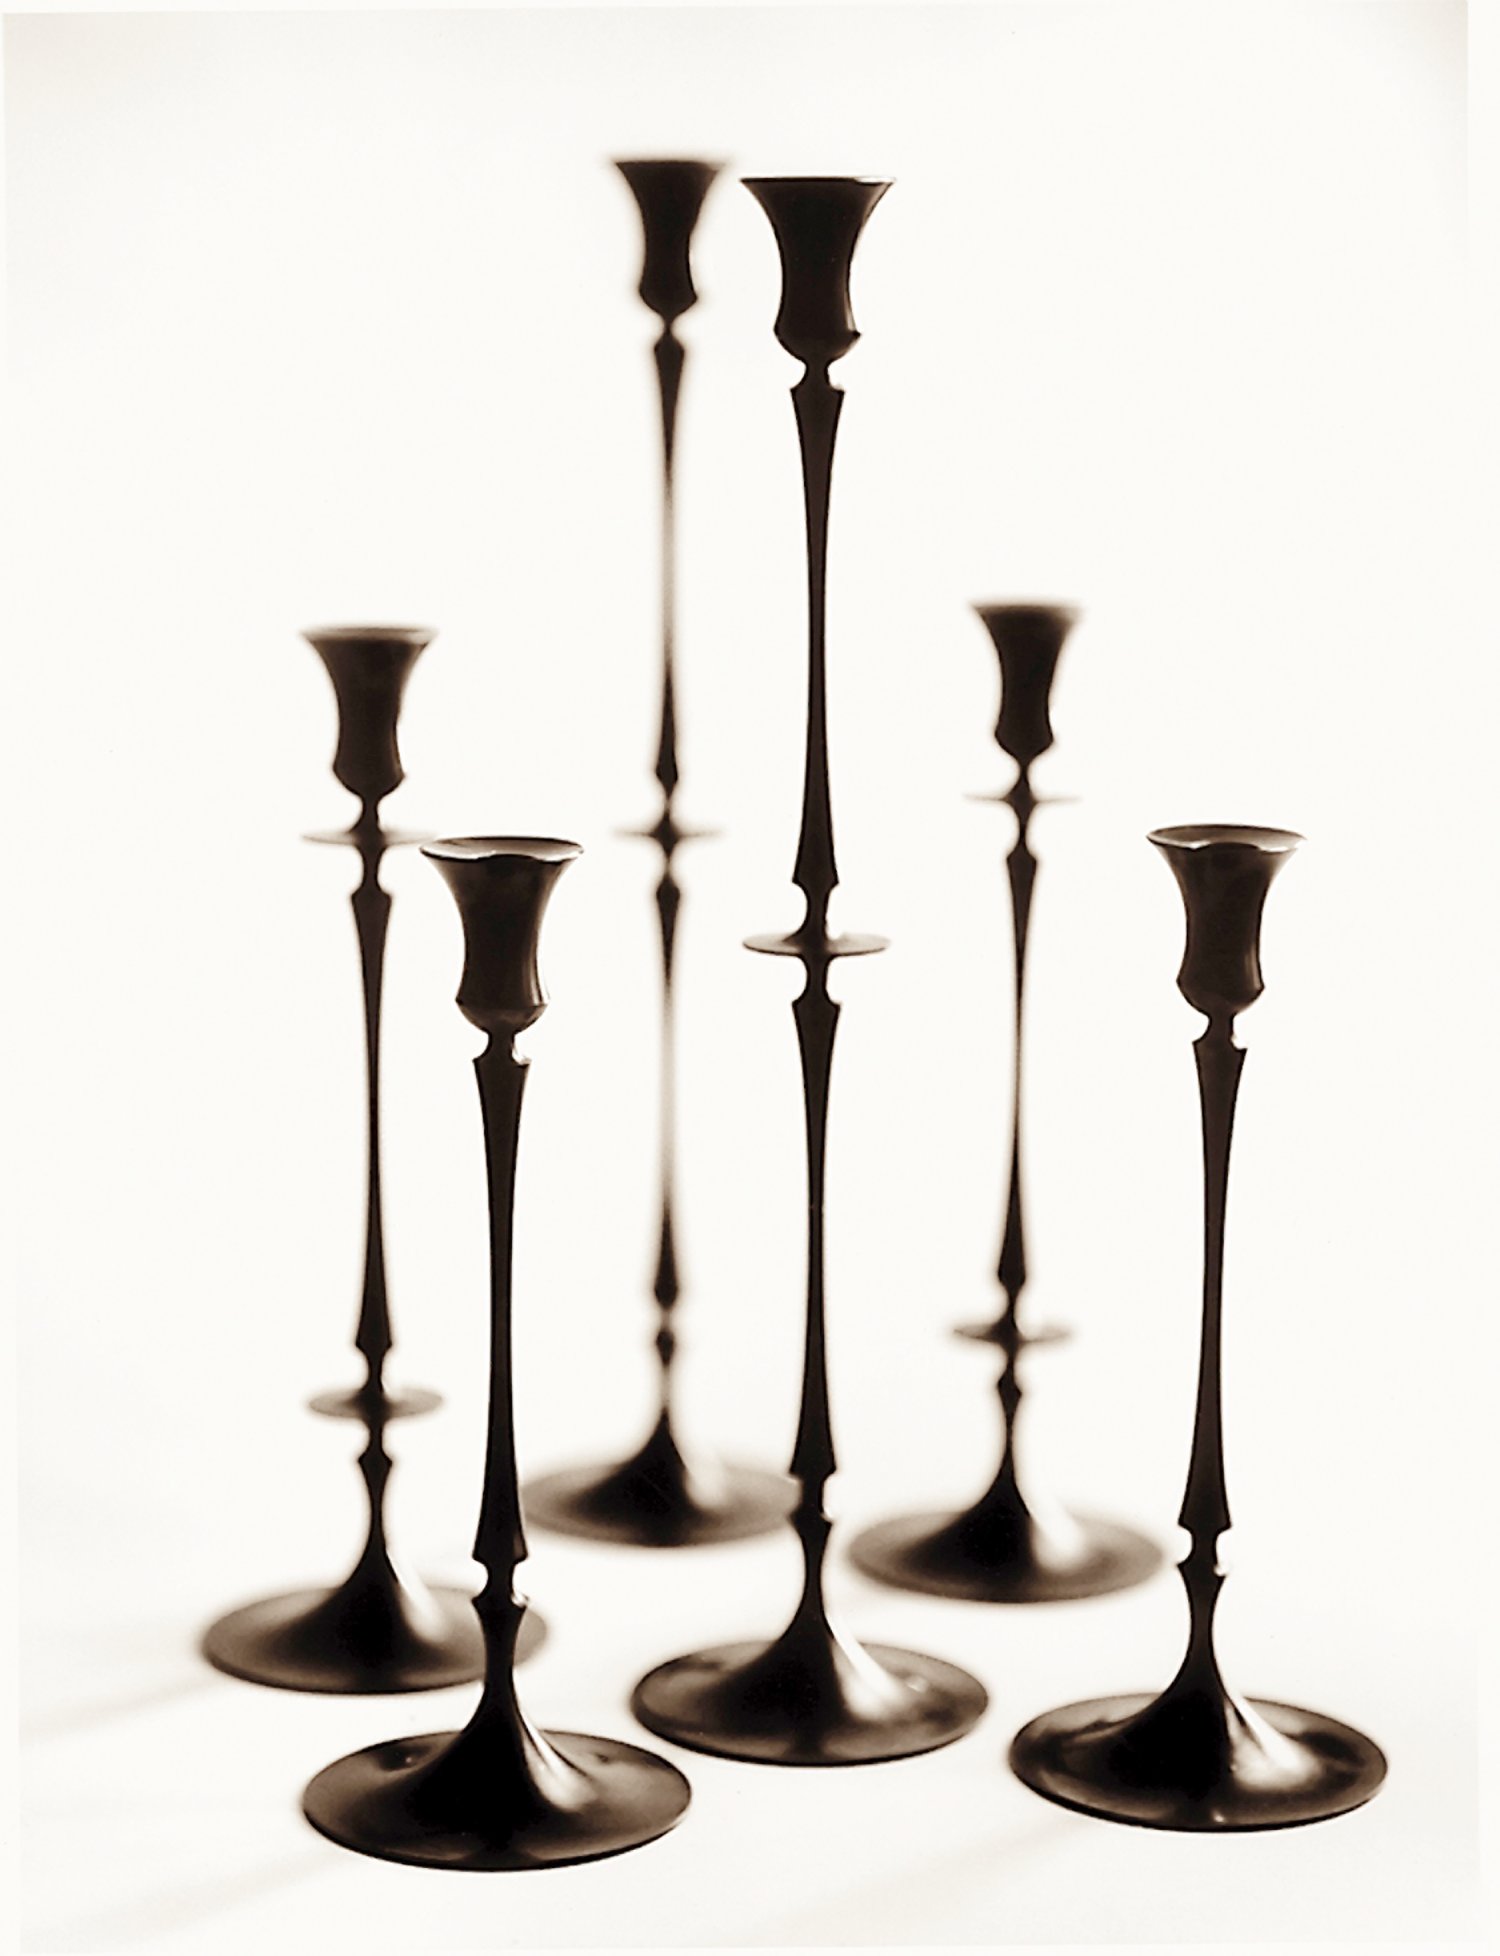 Ted Muehling Biedermeier Candlesticks, E.R. Butler Oxidized by Swoon — Bronze